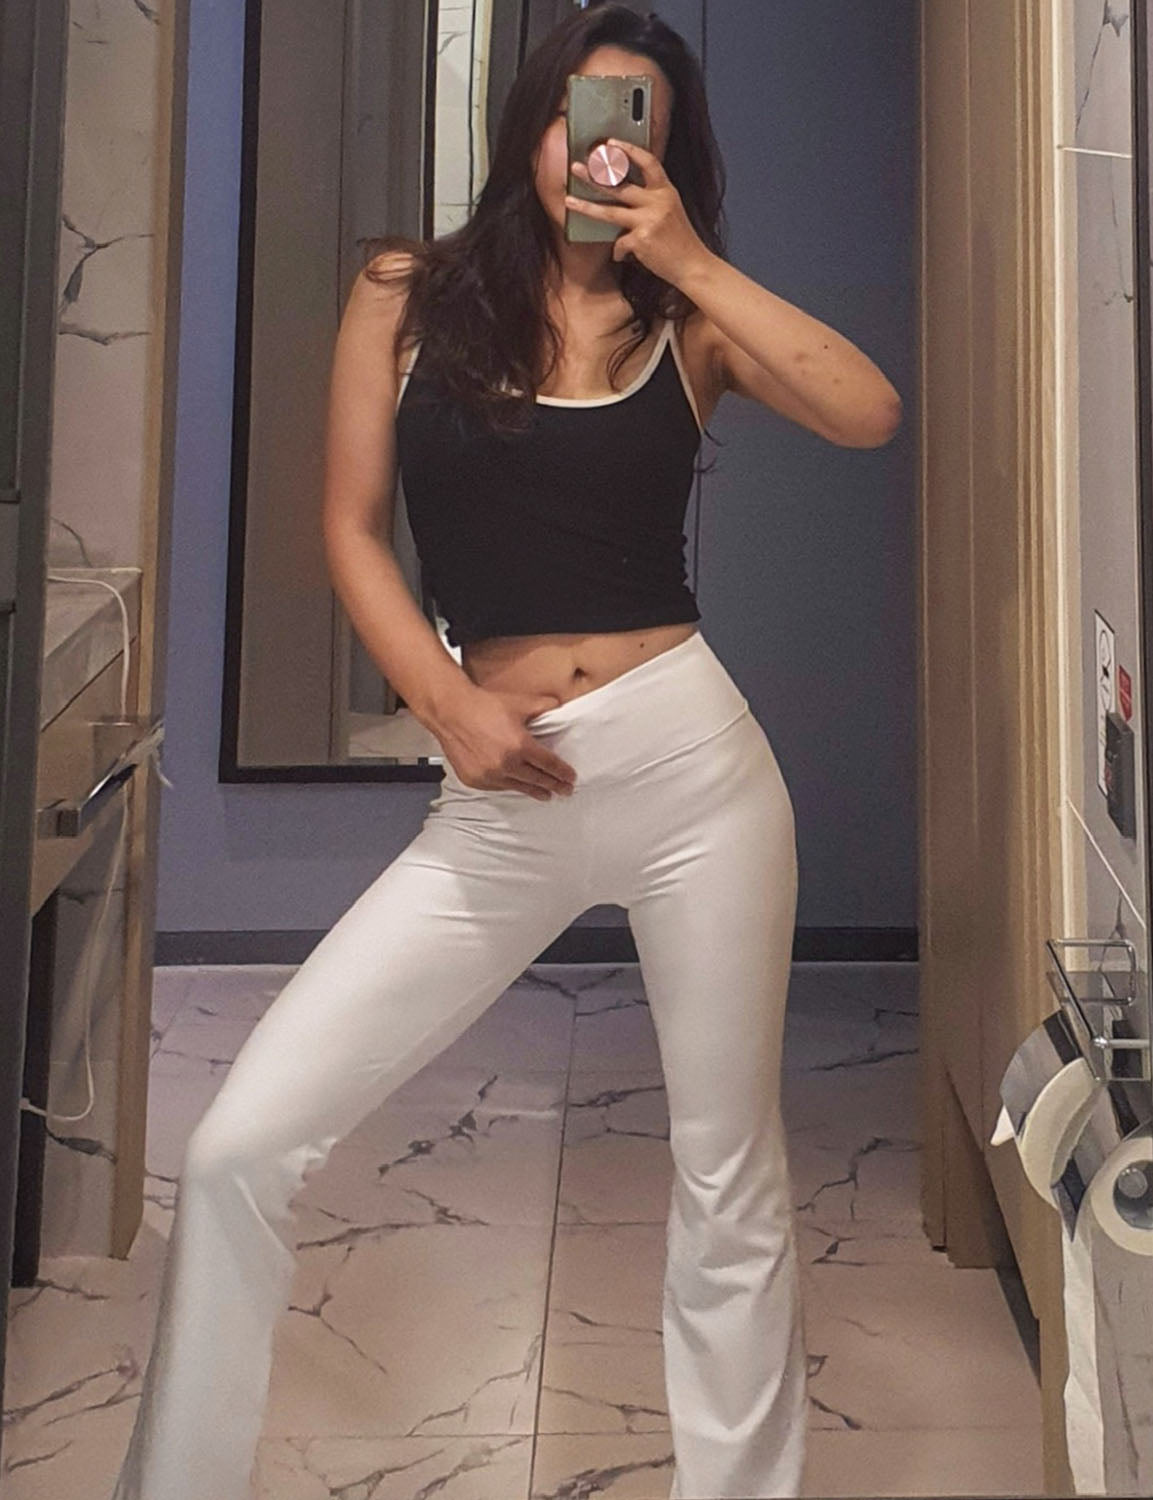 Back Pockets Bootcut Leggings White 87%Nylon/13%Spandex Fabric doesn't attract lint easily 4-way stretch No see-through Moisture-wicking Inner pocket Four lengths